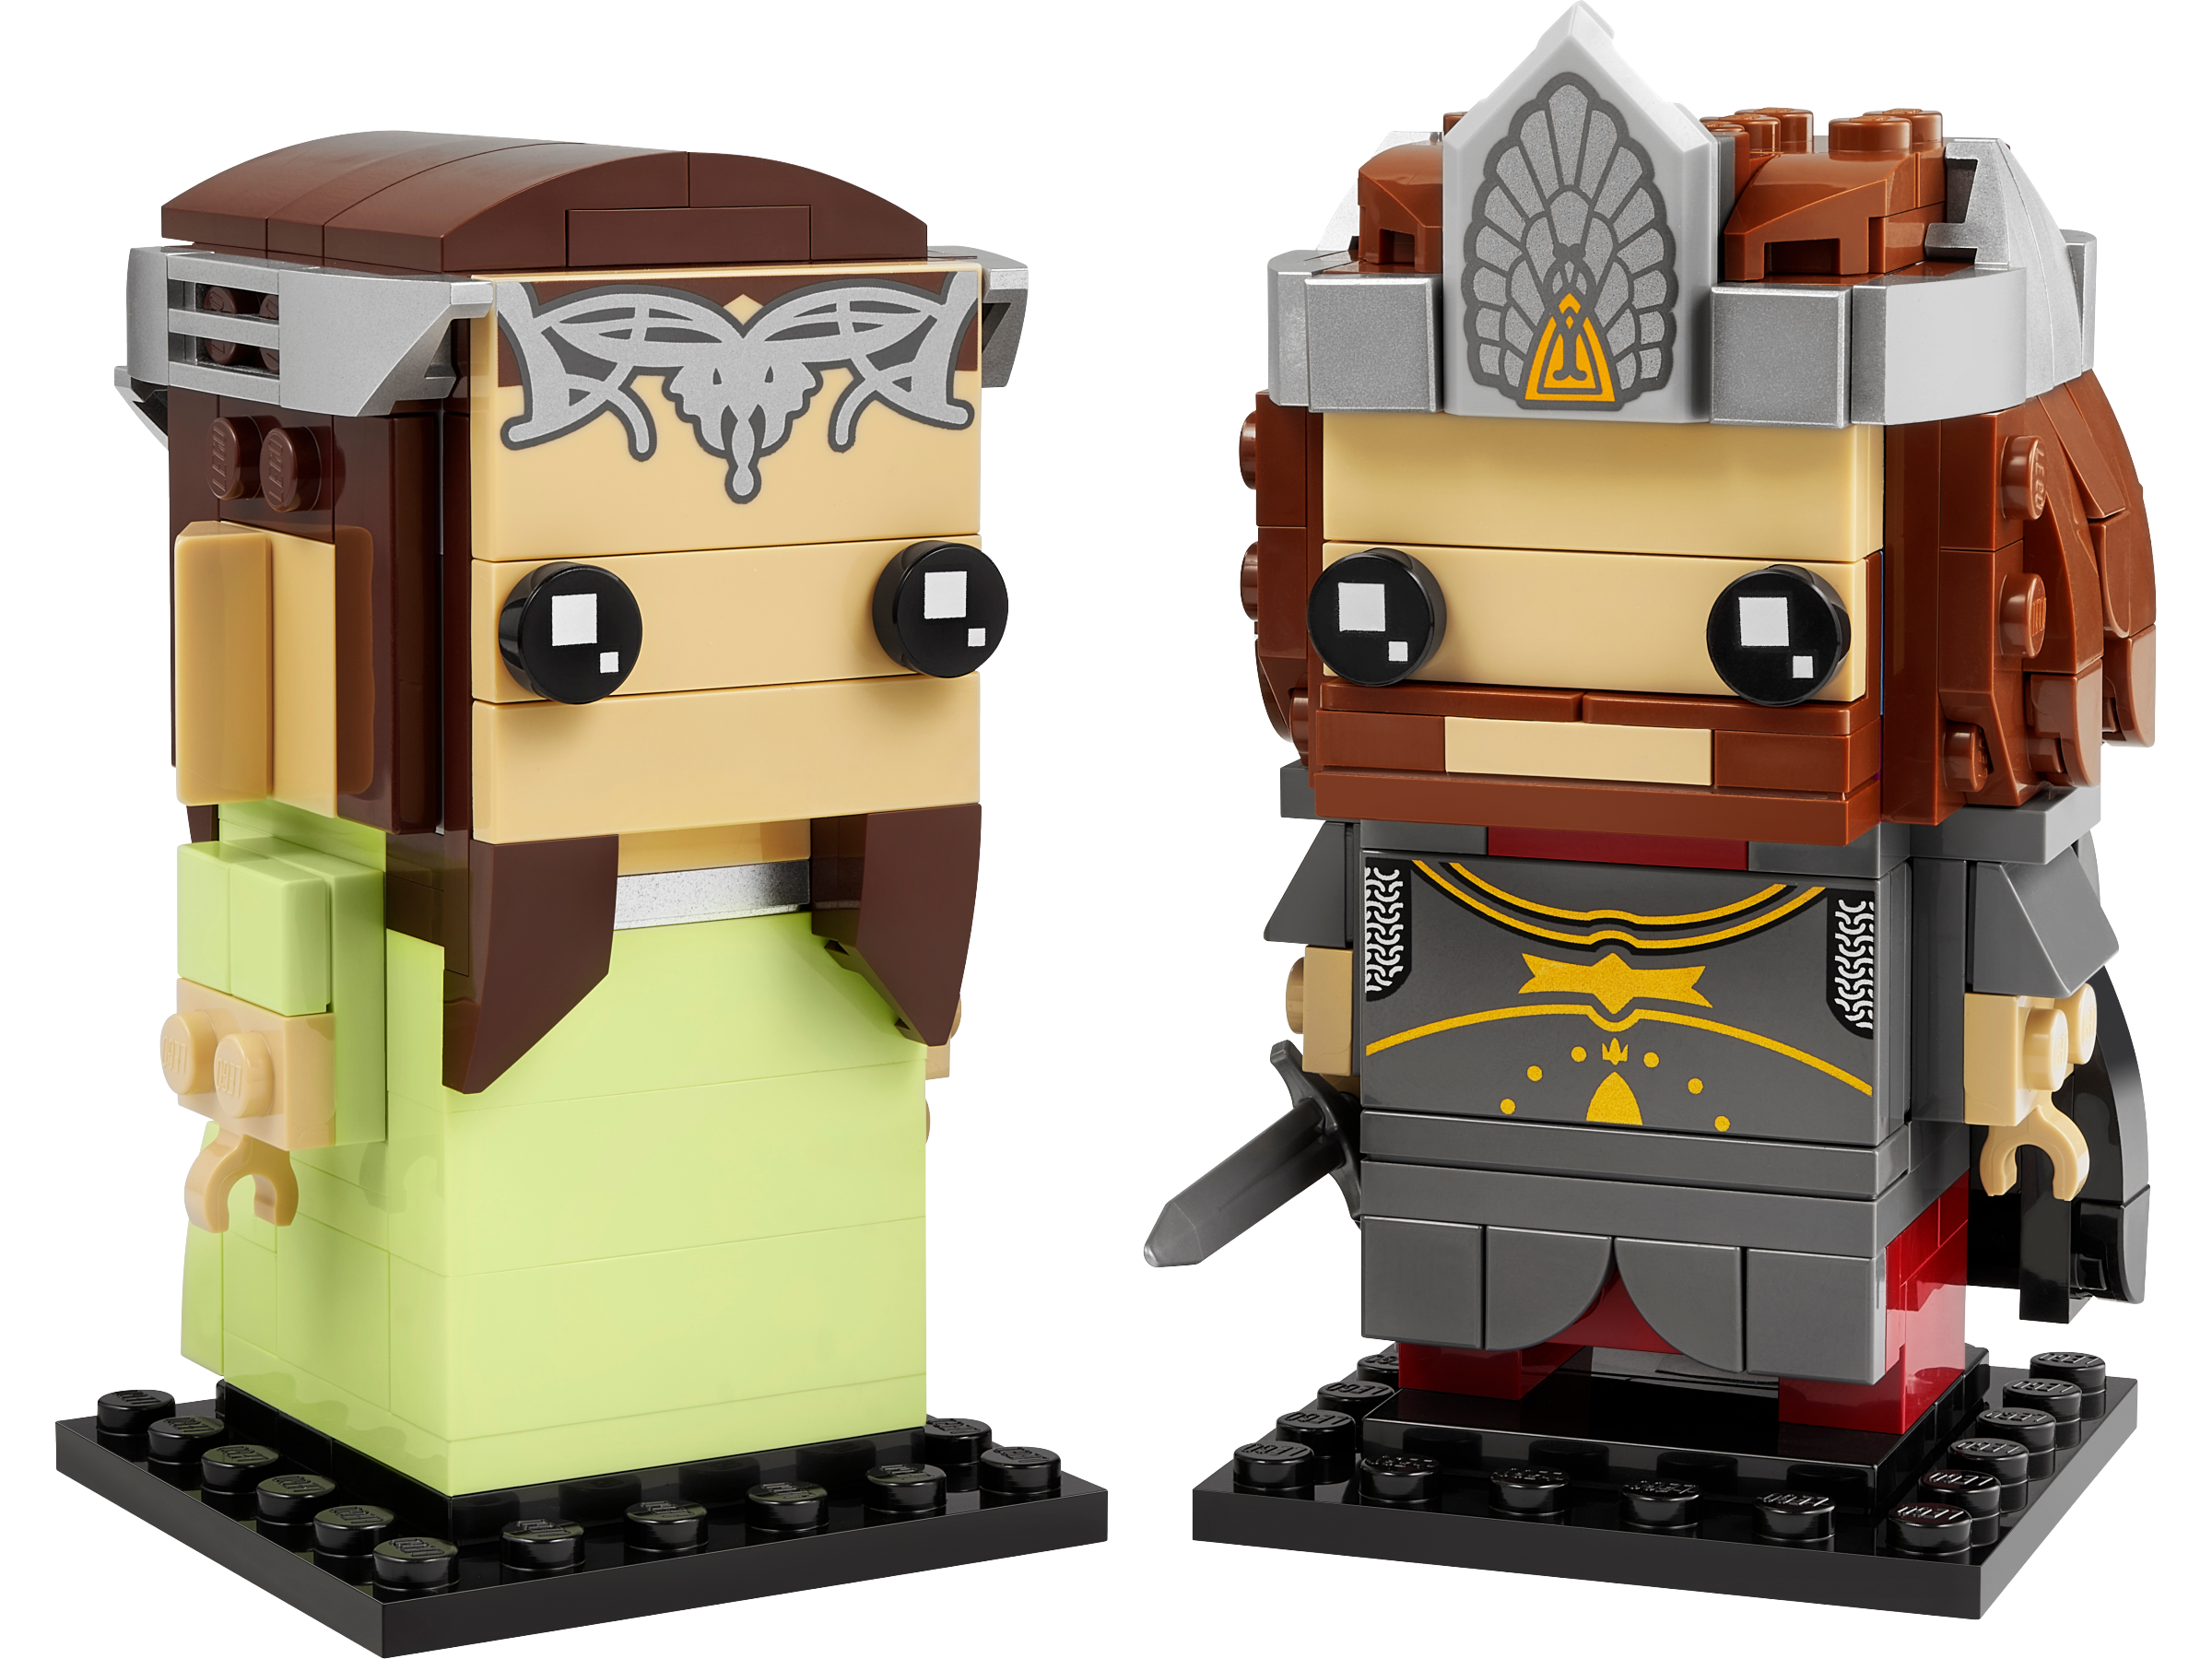 New LEGO BrickHeadz an sign for future The Lord of the Rings sets – Brick Fanatics – LEGO News, Reviews and Builds